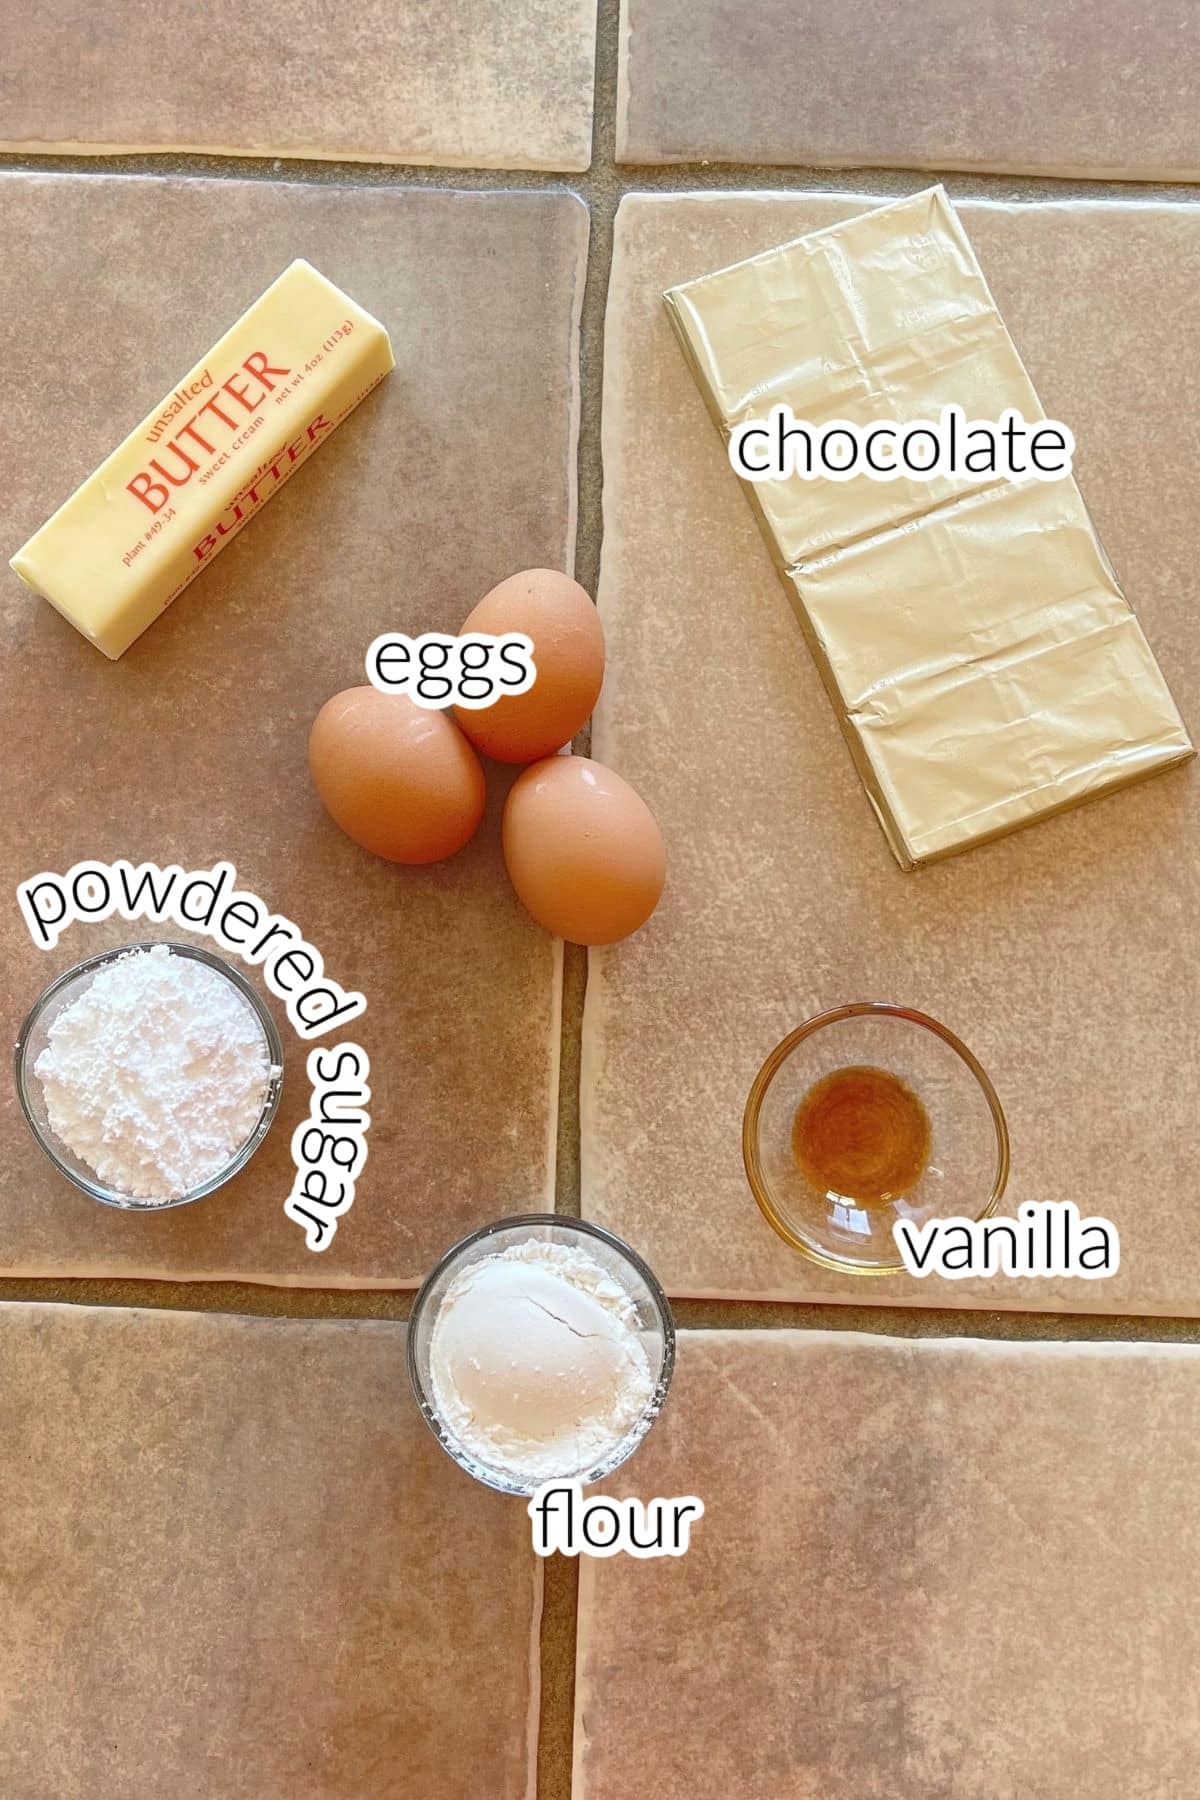 Recipe ingredients on a tile surface.